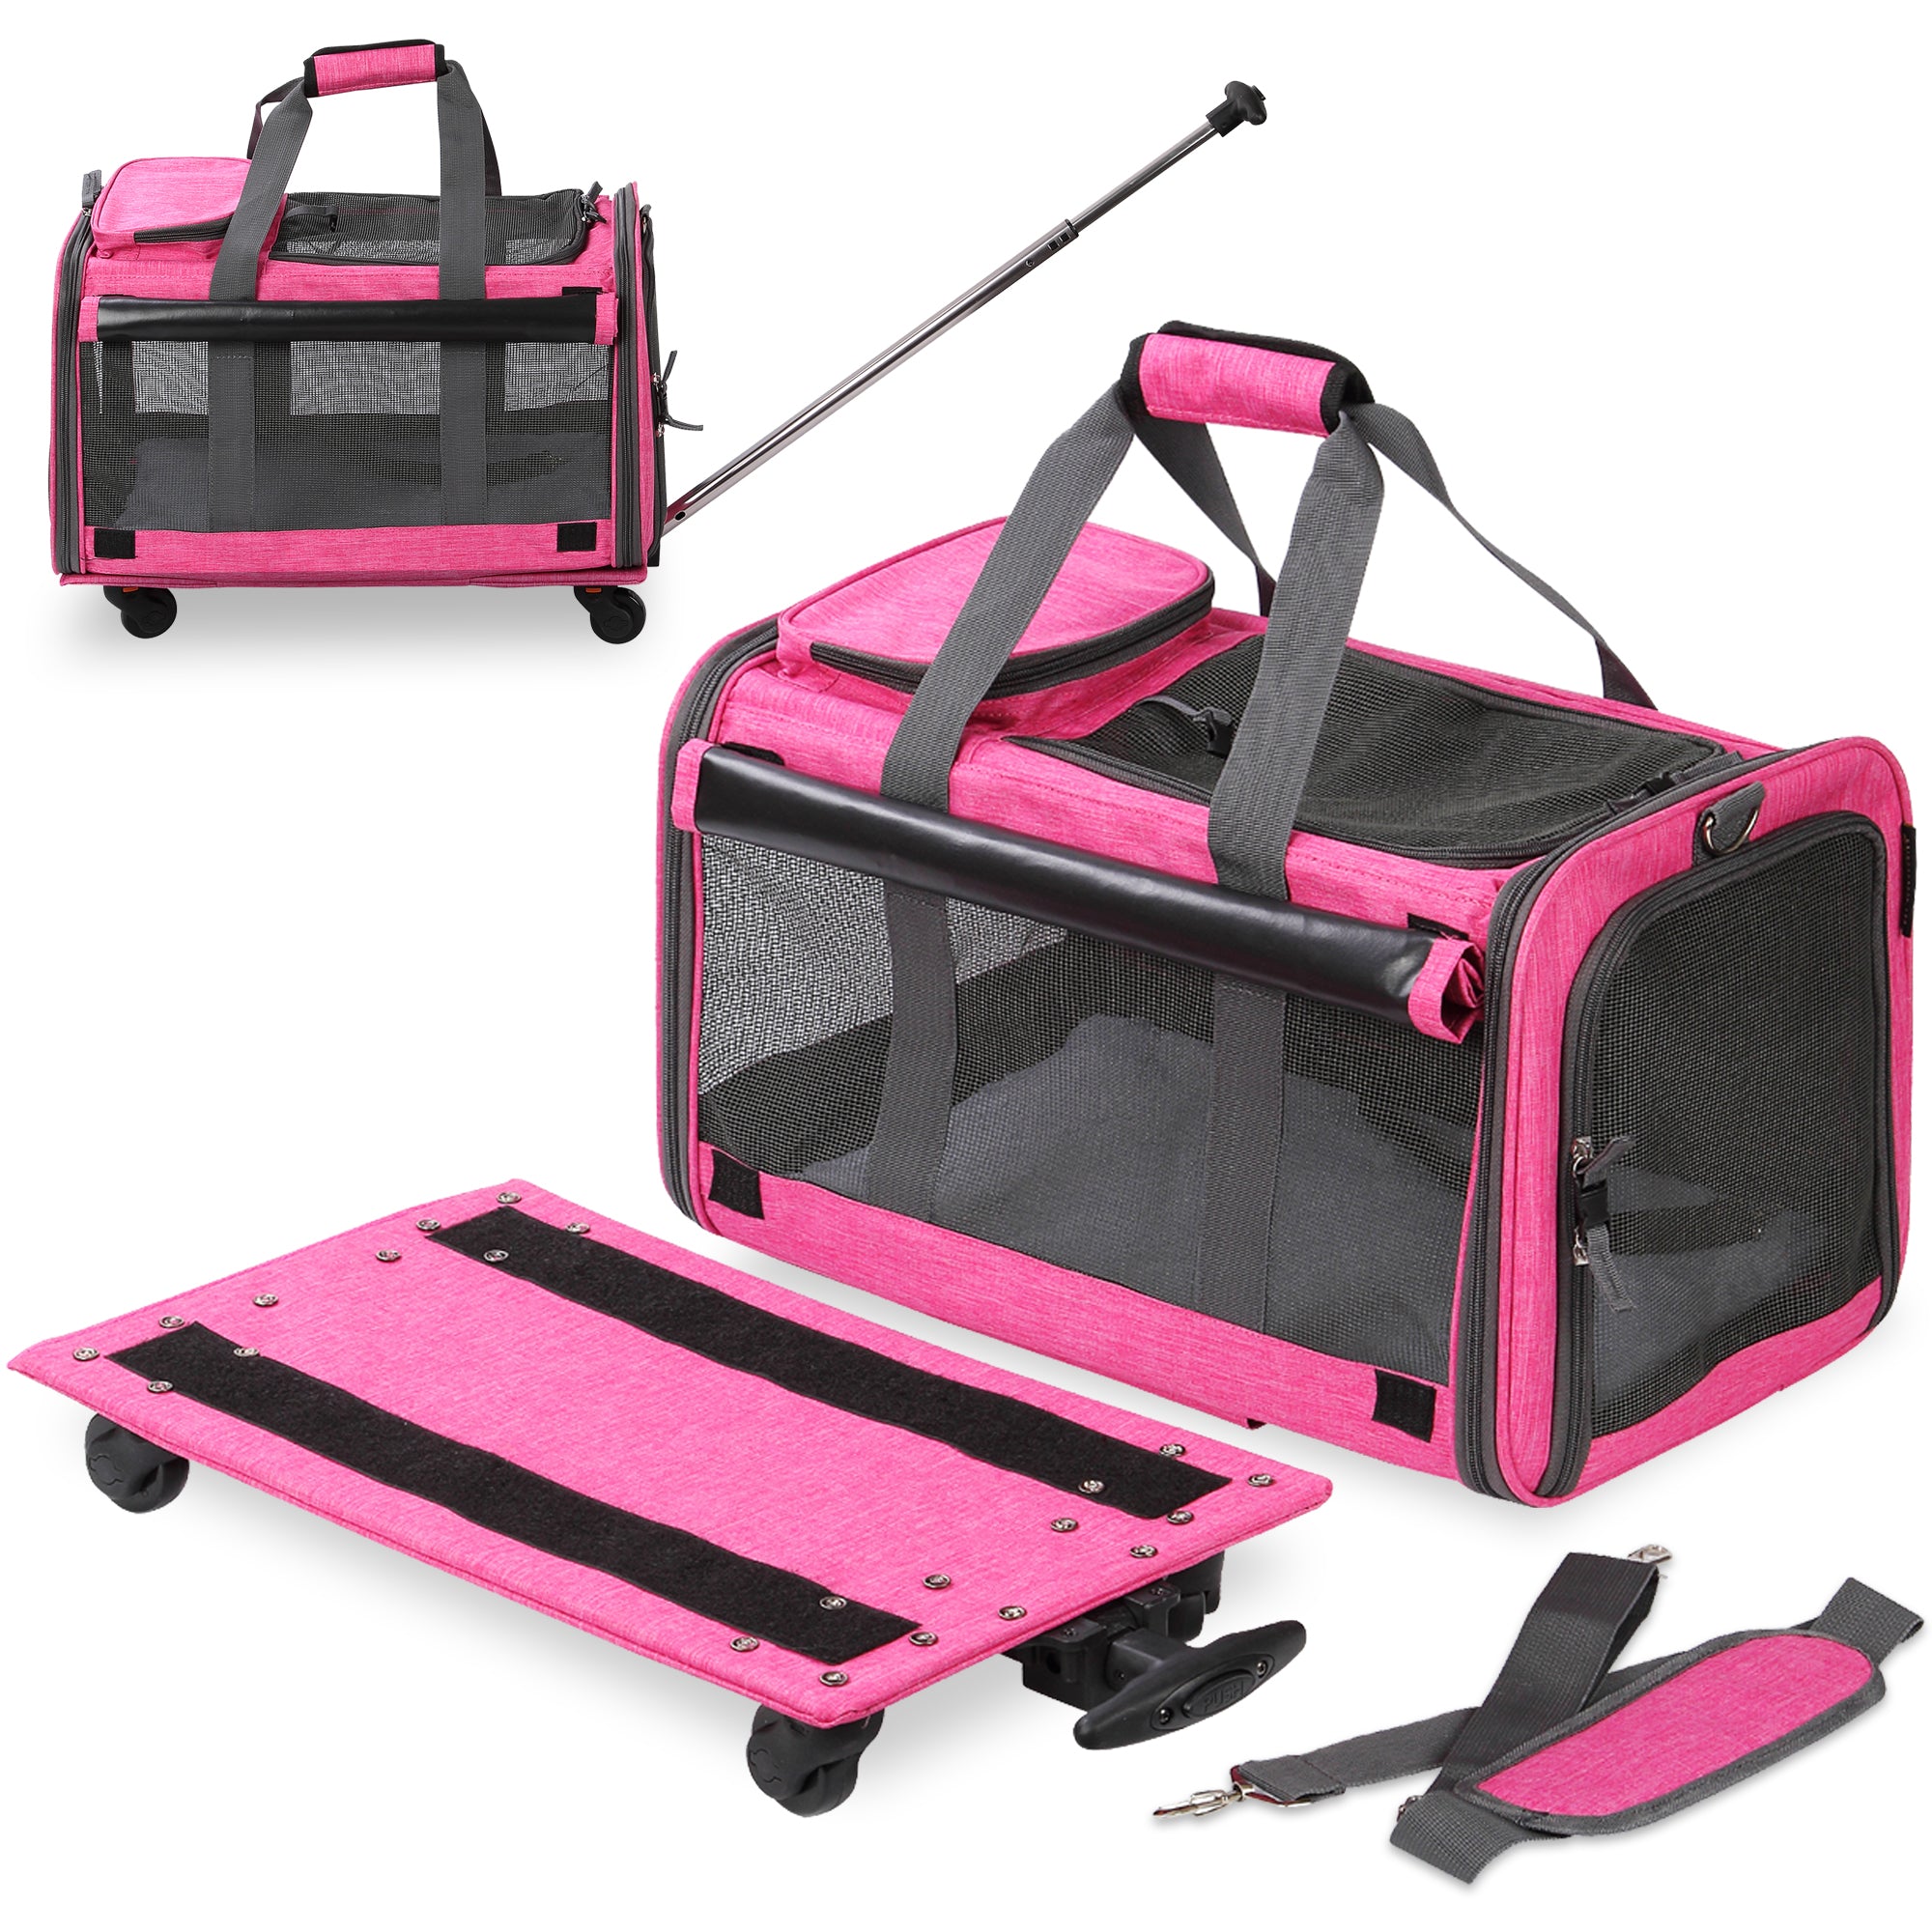 Pet Carrier with Detachable Wheels for Small and Medium Dogs & Cats - Pink